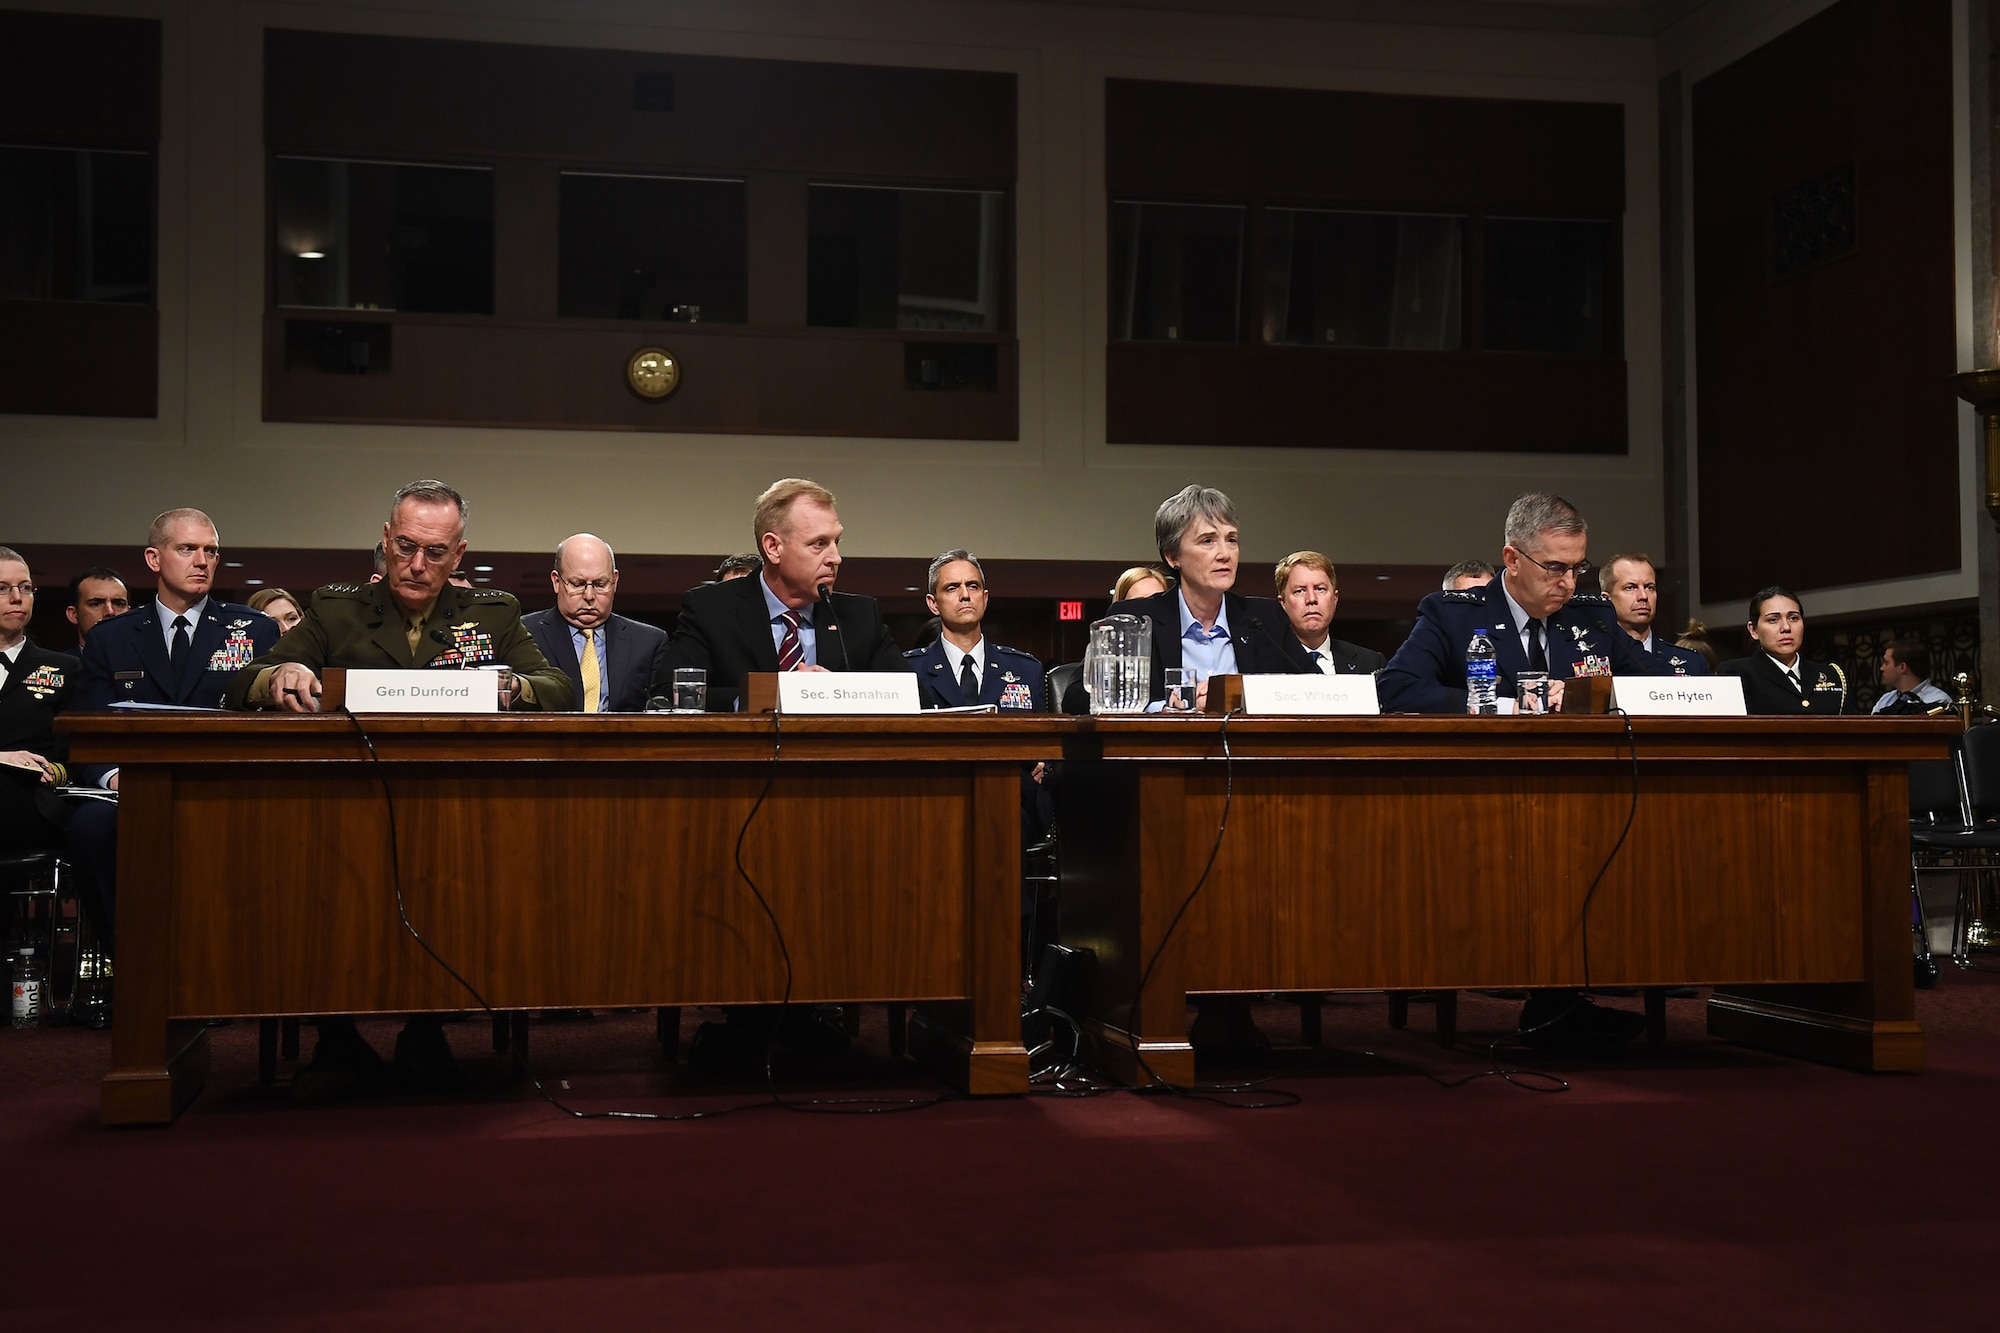 Secretary of the Air Force Heather Wilson (second from right) testifies on the proposal to establish a United States Space Force during a Senate Armed Services Committee hearing in Washington, D.C., April 11, 2019. (U.S. Air Force photo by Adrian Cadiz)